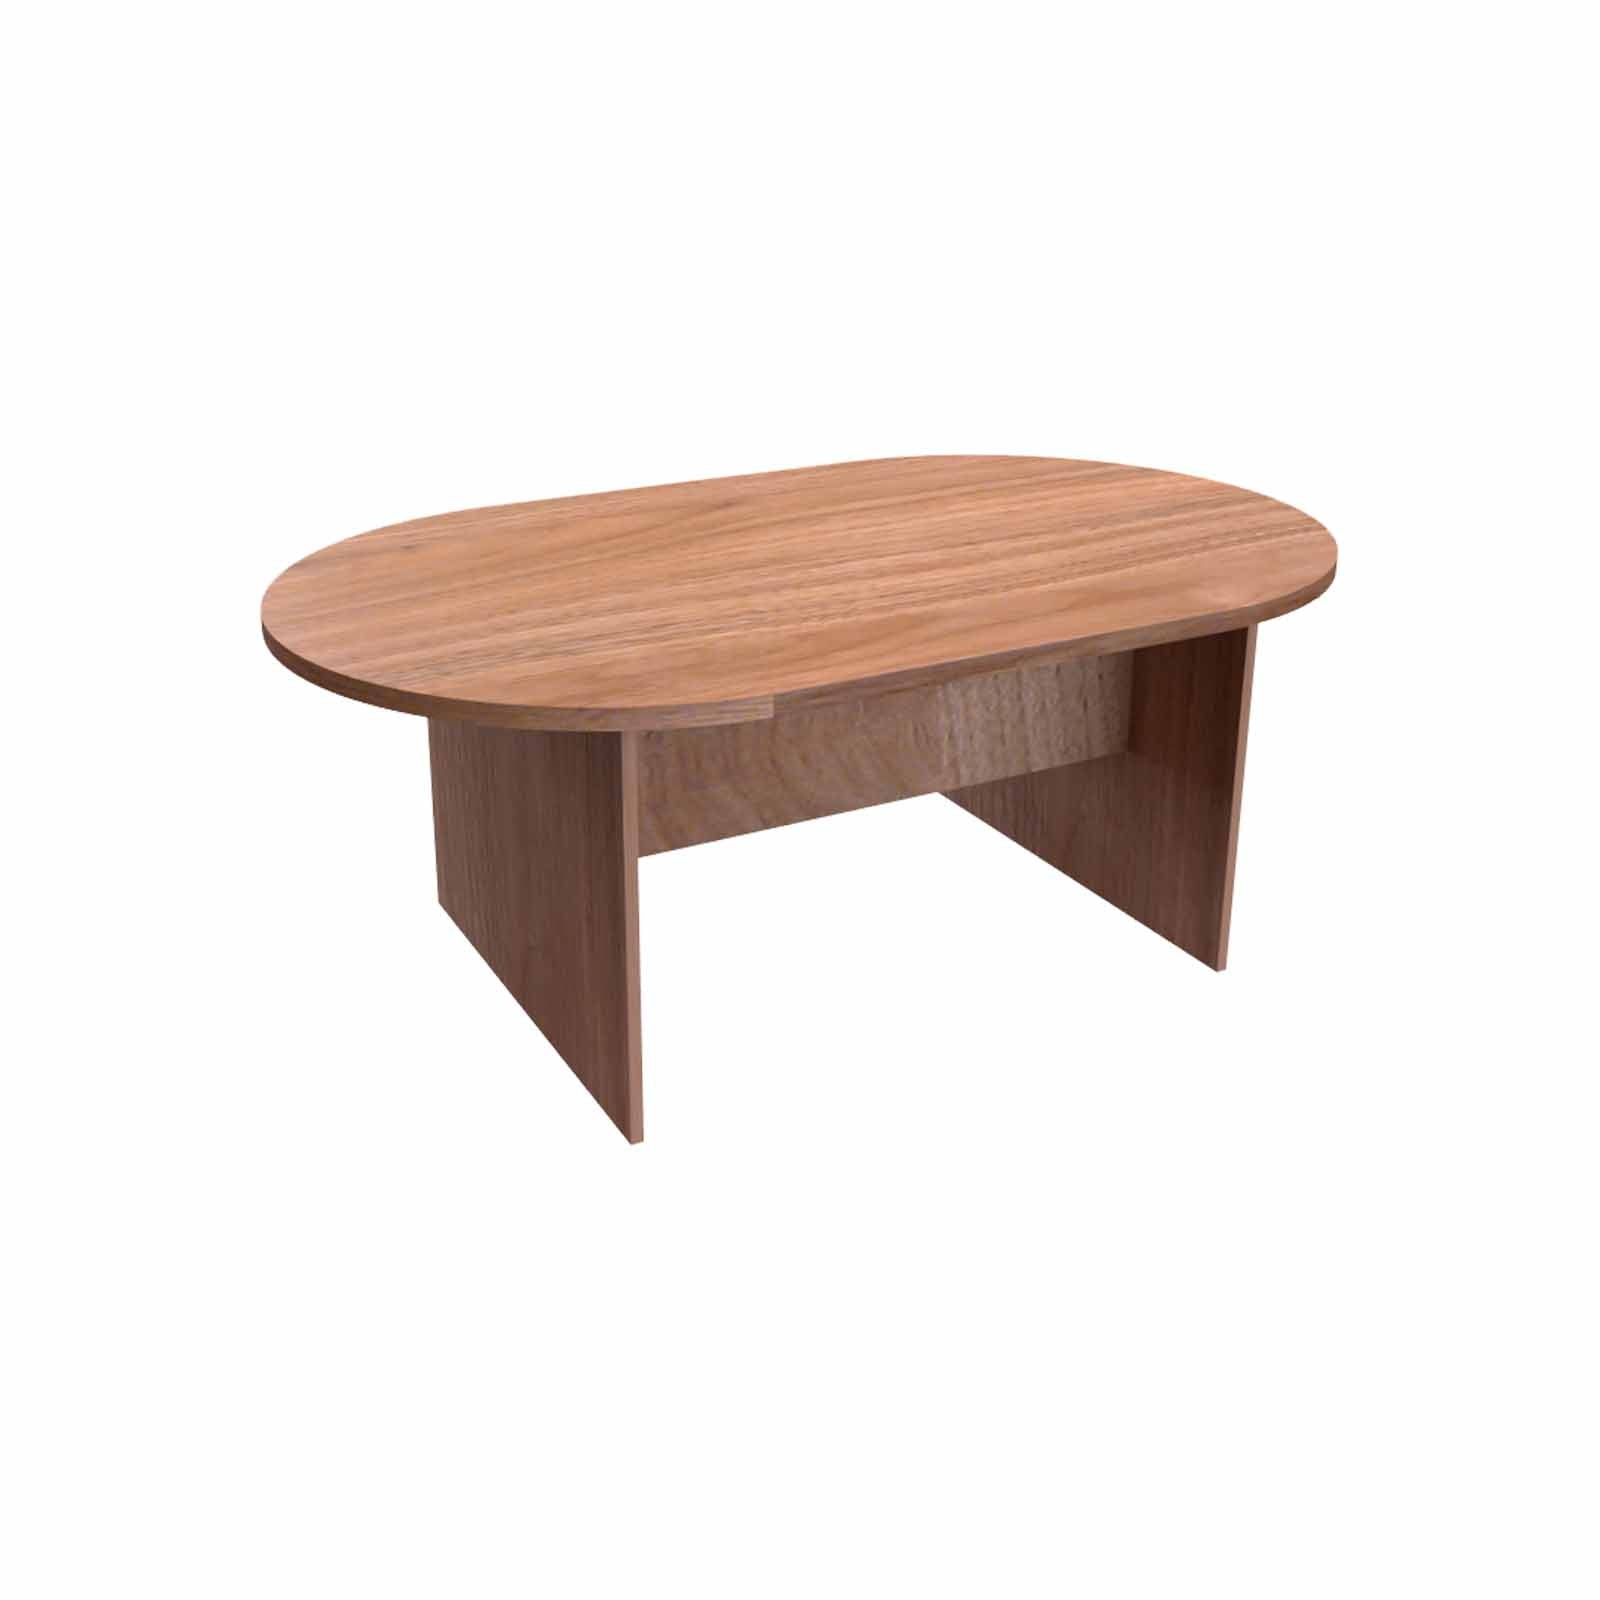 MADE TO ORDER D-End Meeting Table 25mm Top W2000 x D1200 x H740mm